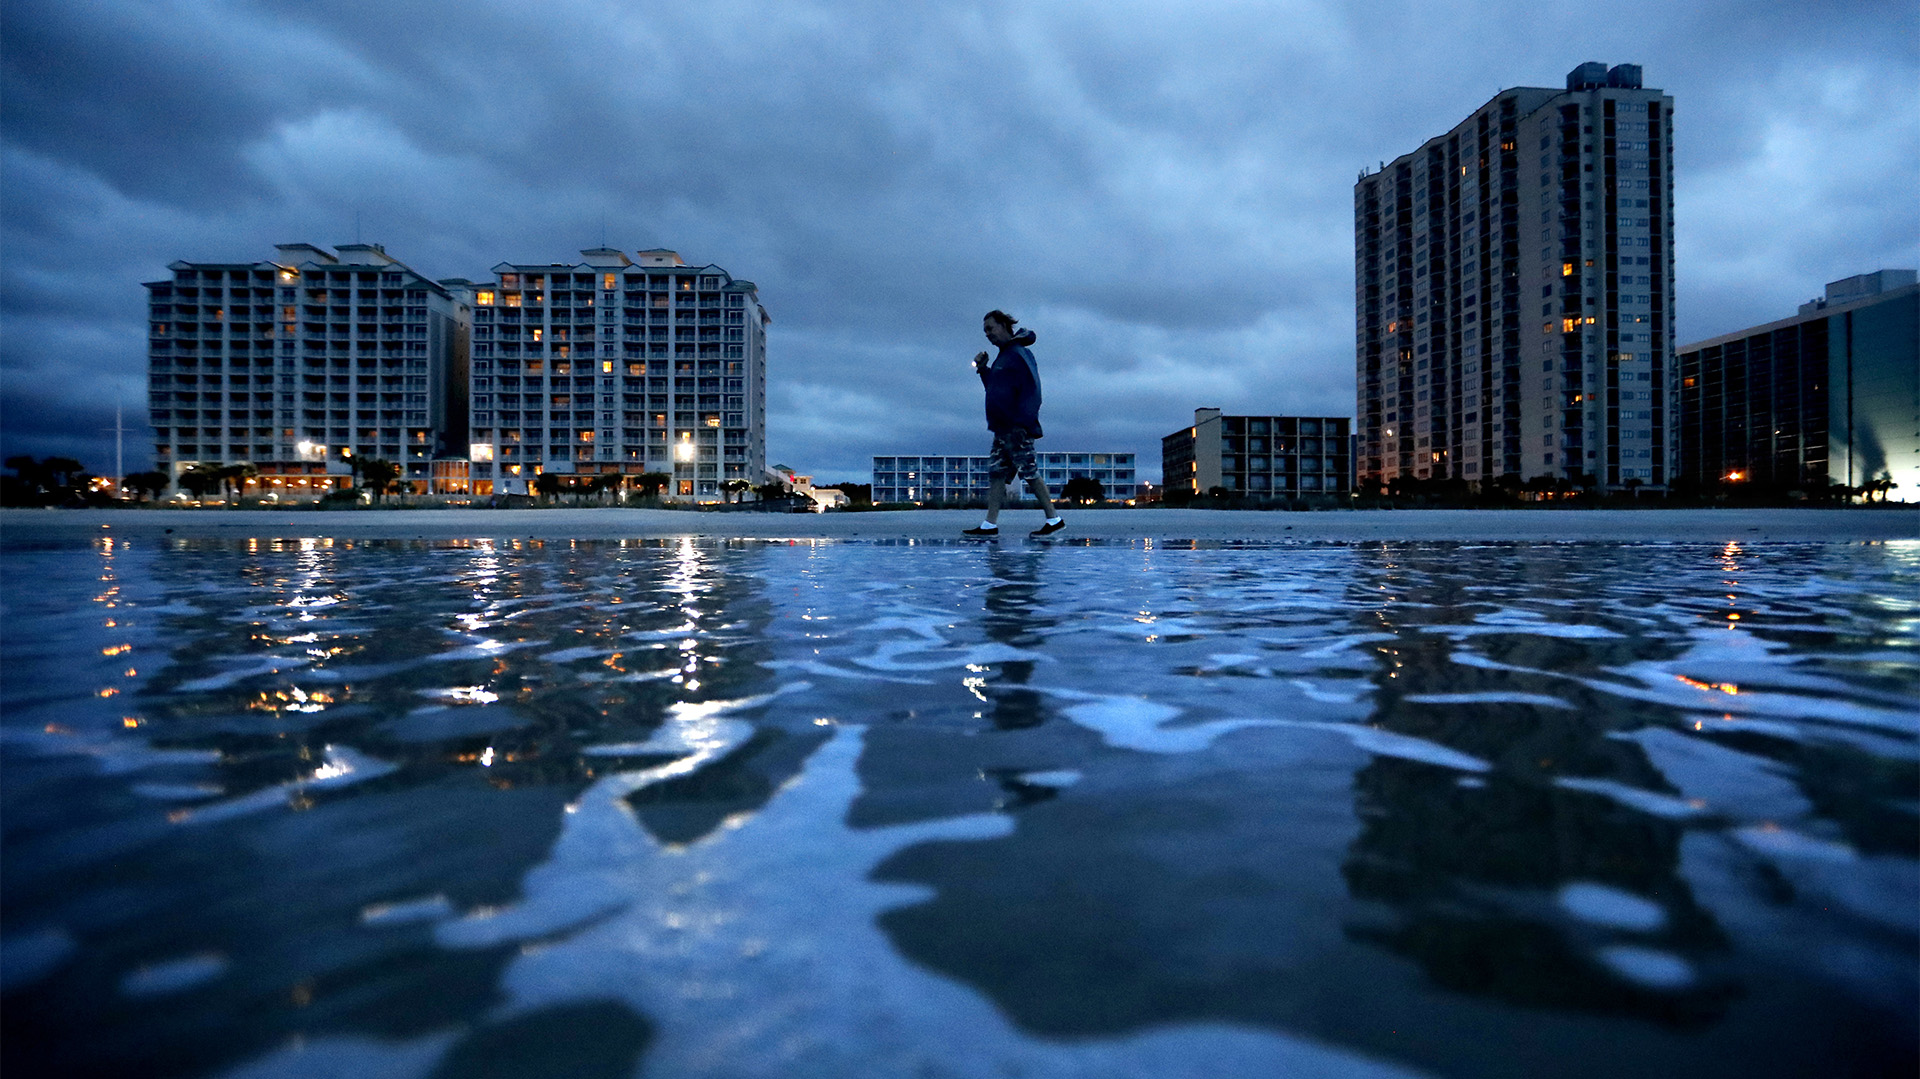 Russ Lewis looks for shells along the beach as Hurricane Florence approaches Myrtle Beach, S.C., Friday, Sept. 14, 2018. “We might get lucky we might not we’ll find out,” said Lewis of the storm. (AP Photo/David Goldman)